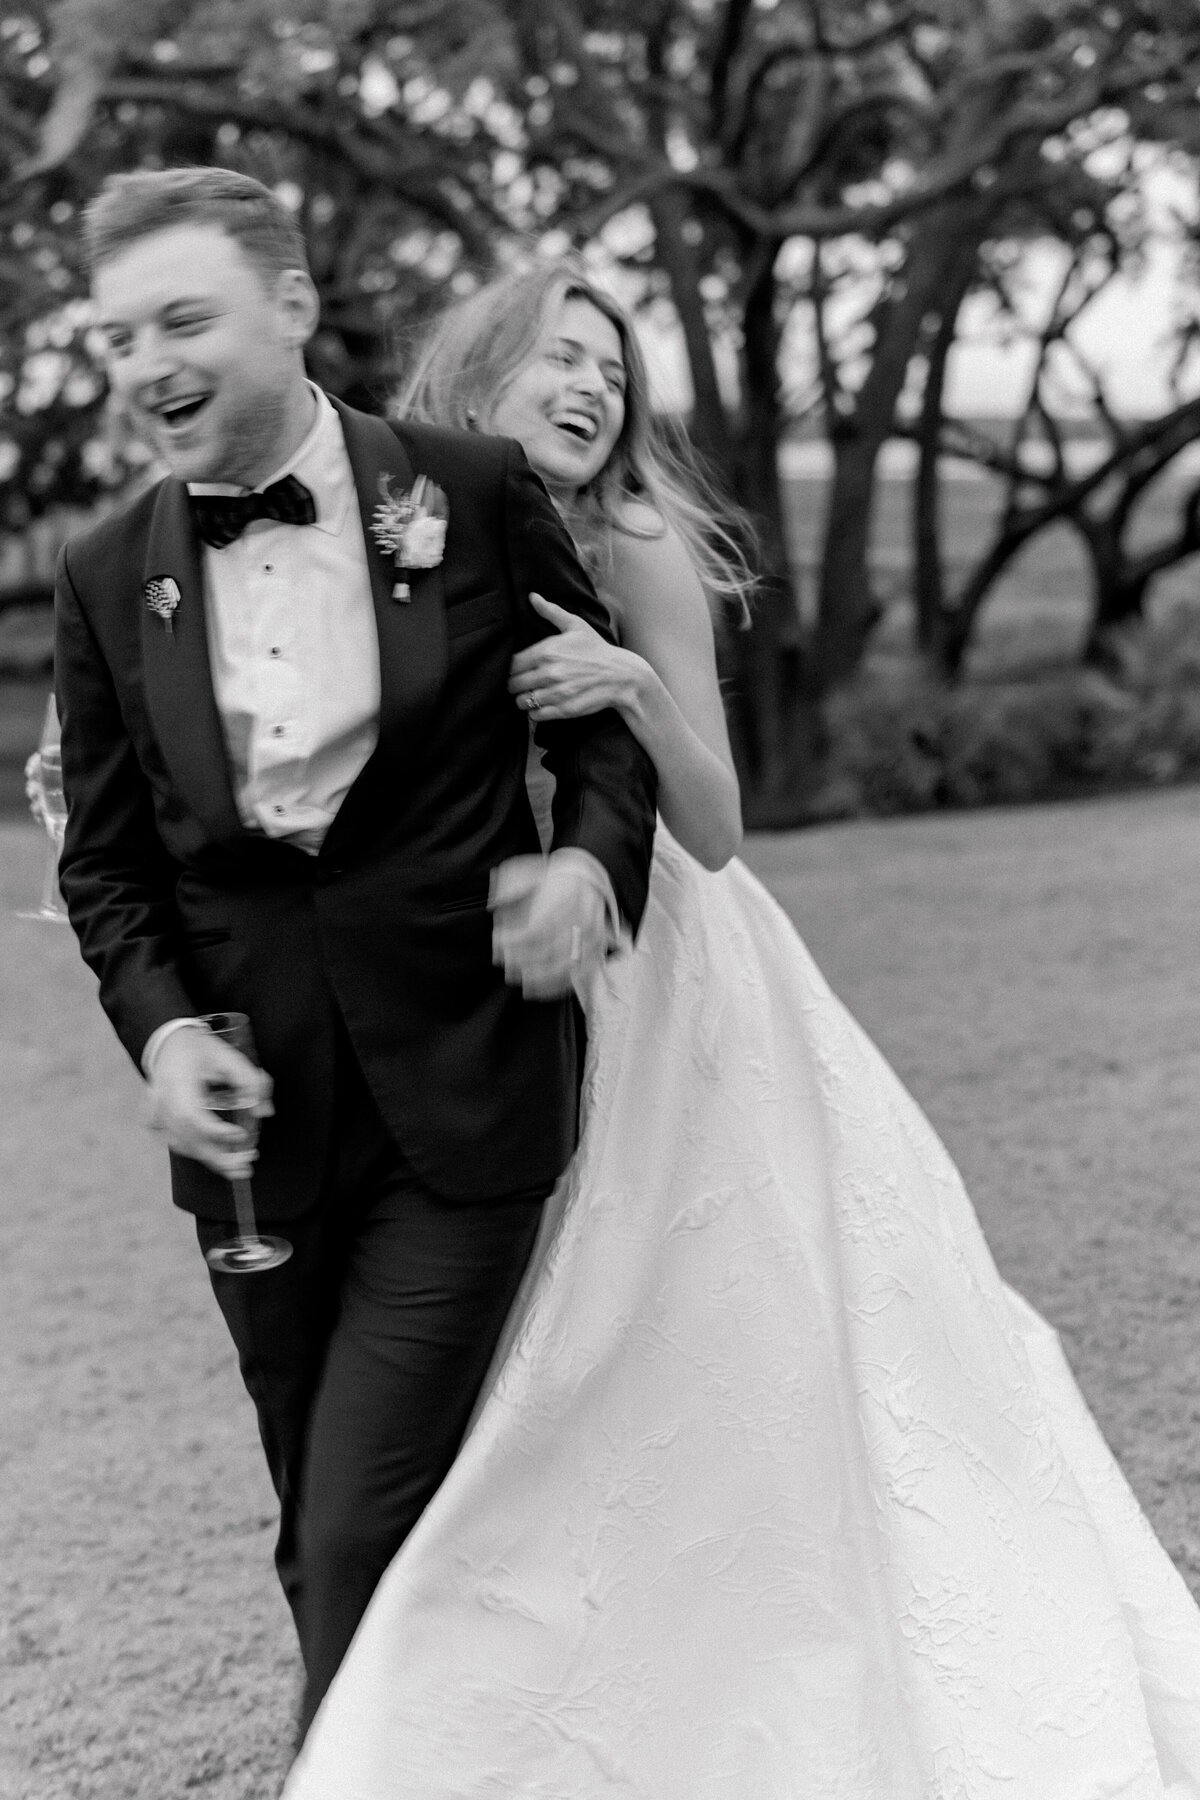 Candid black and white Charleston wedding photographer. Bride and groom fun motion blur photo. Kailee DiMeglio Photography.